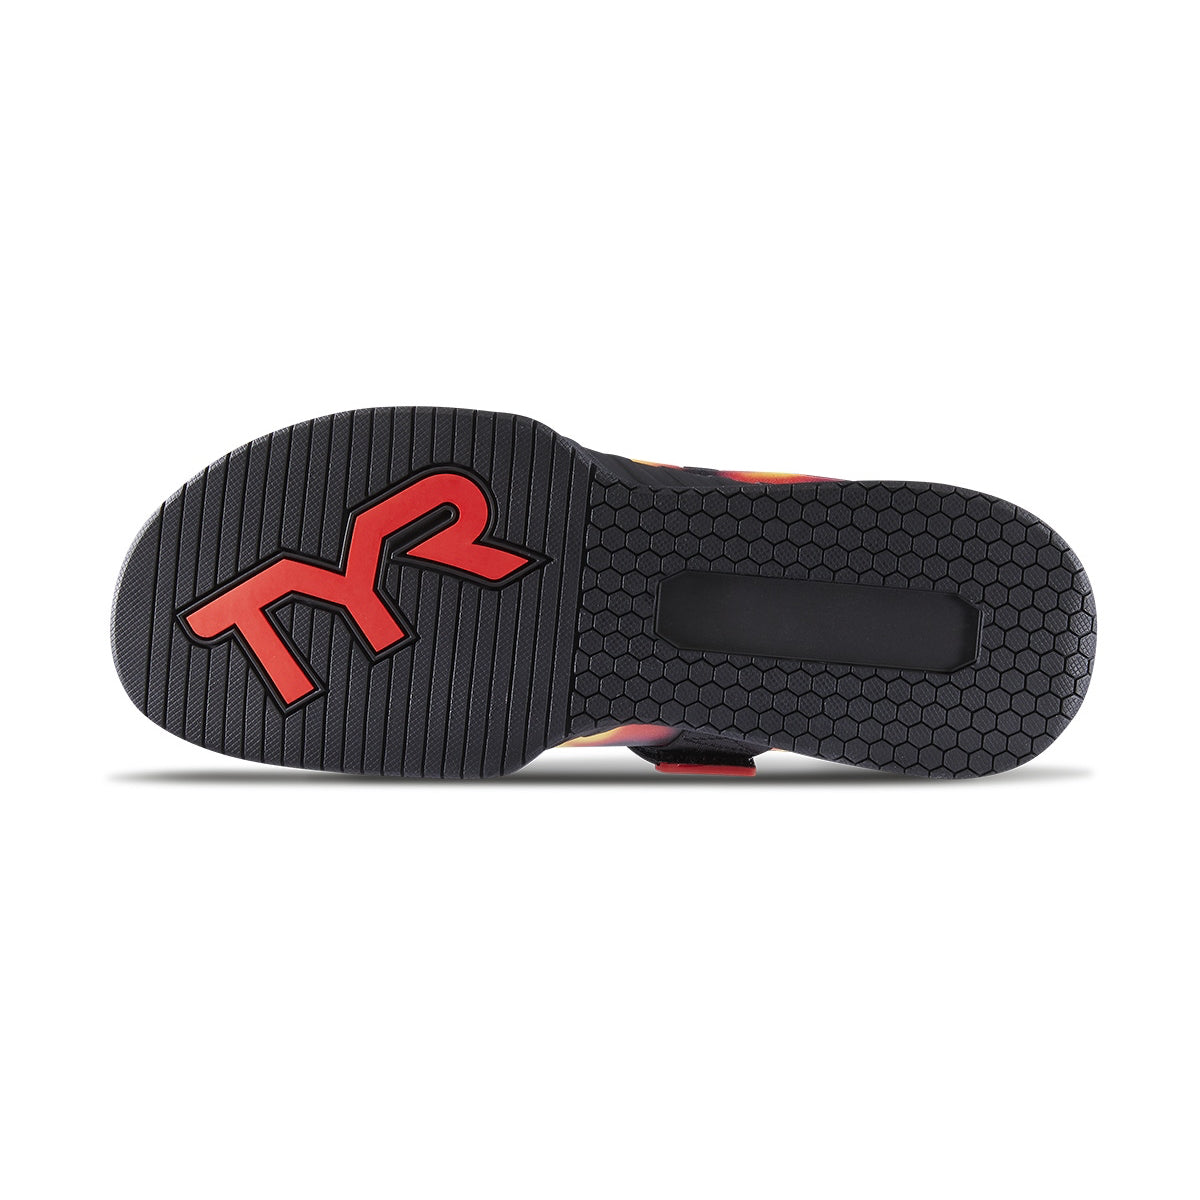 TYR L-1 Lifter Shoes (937 Fire)